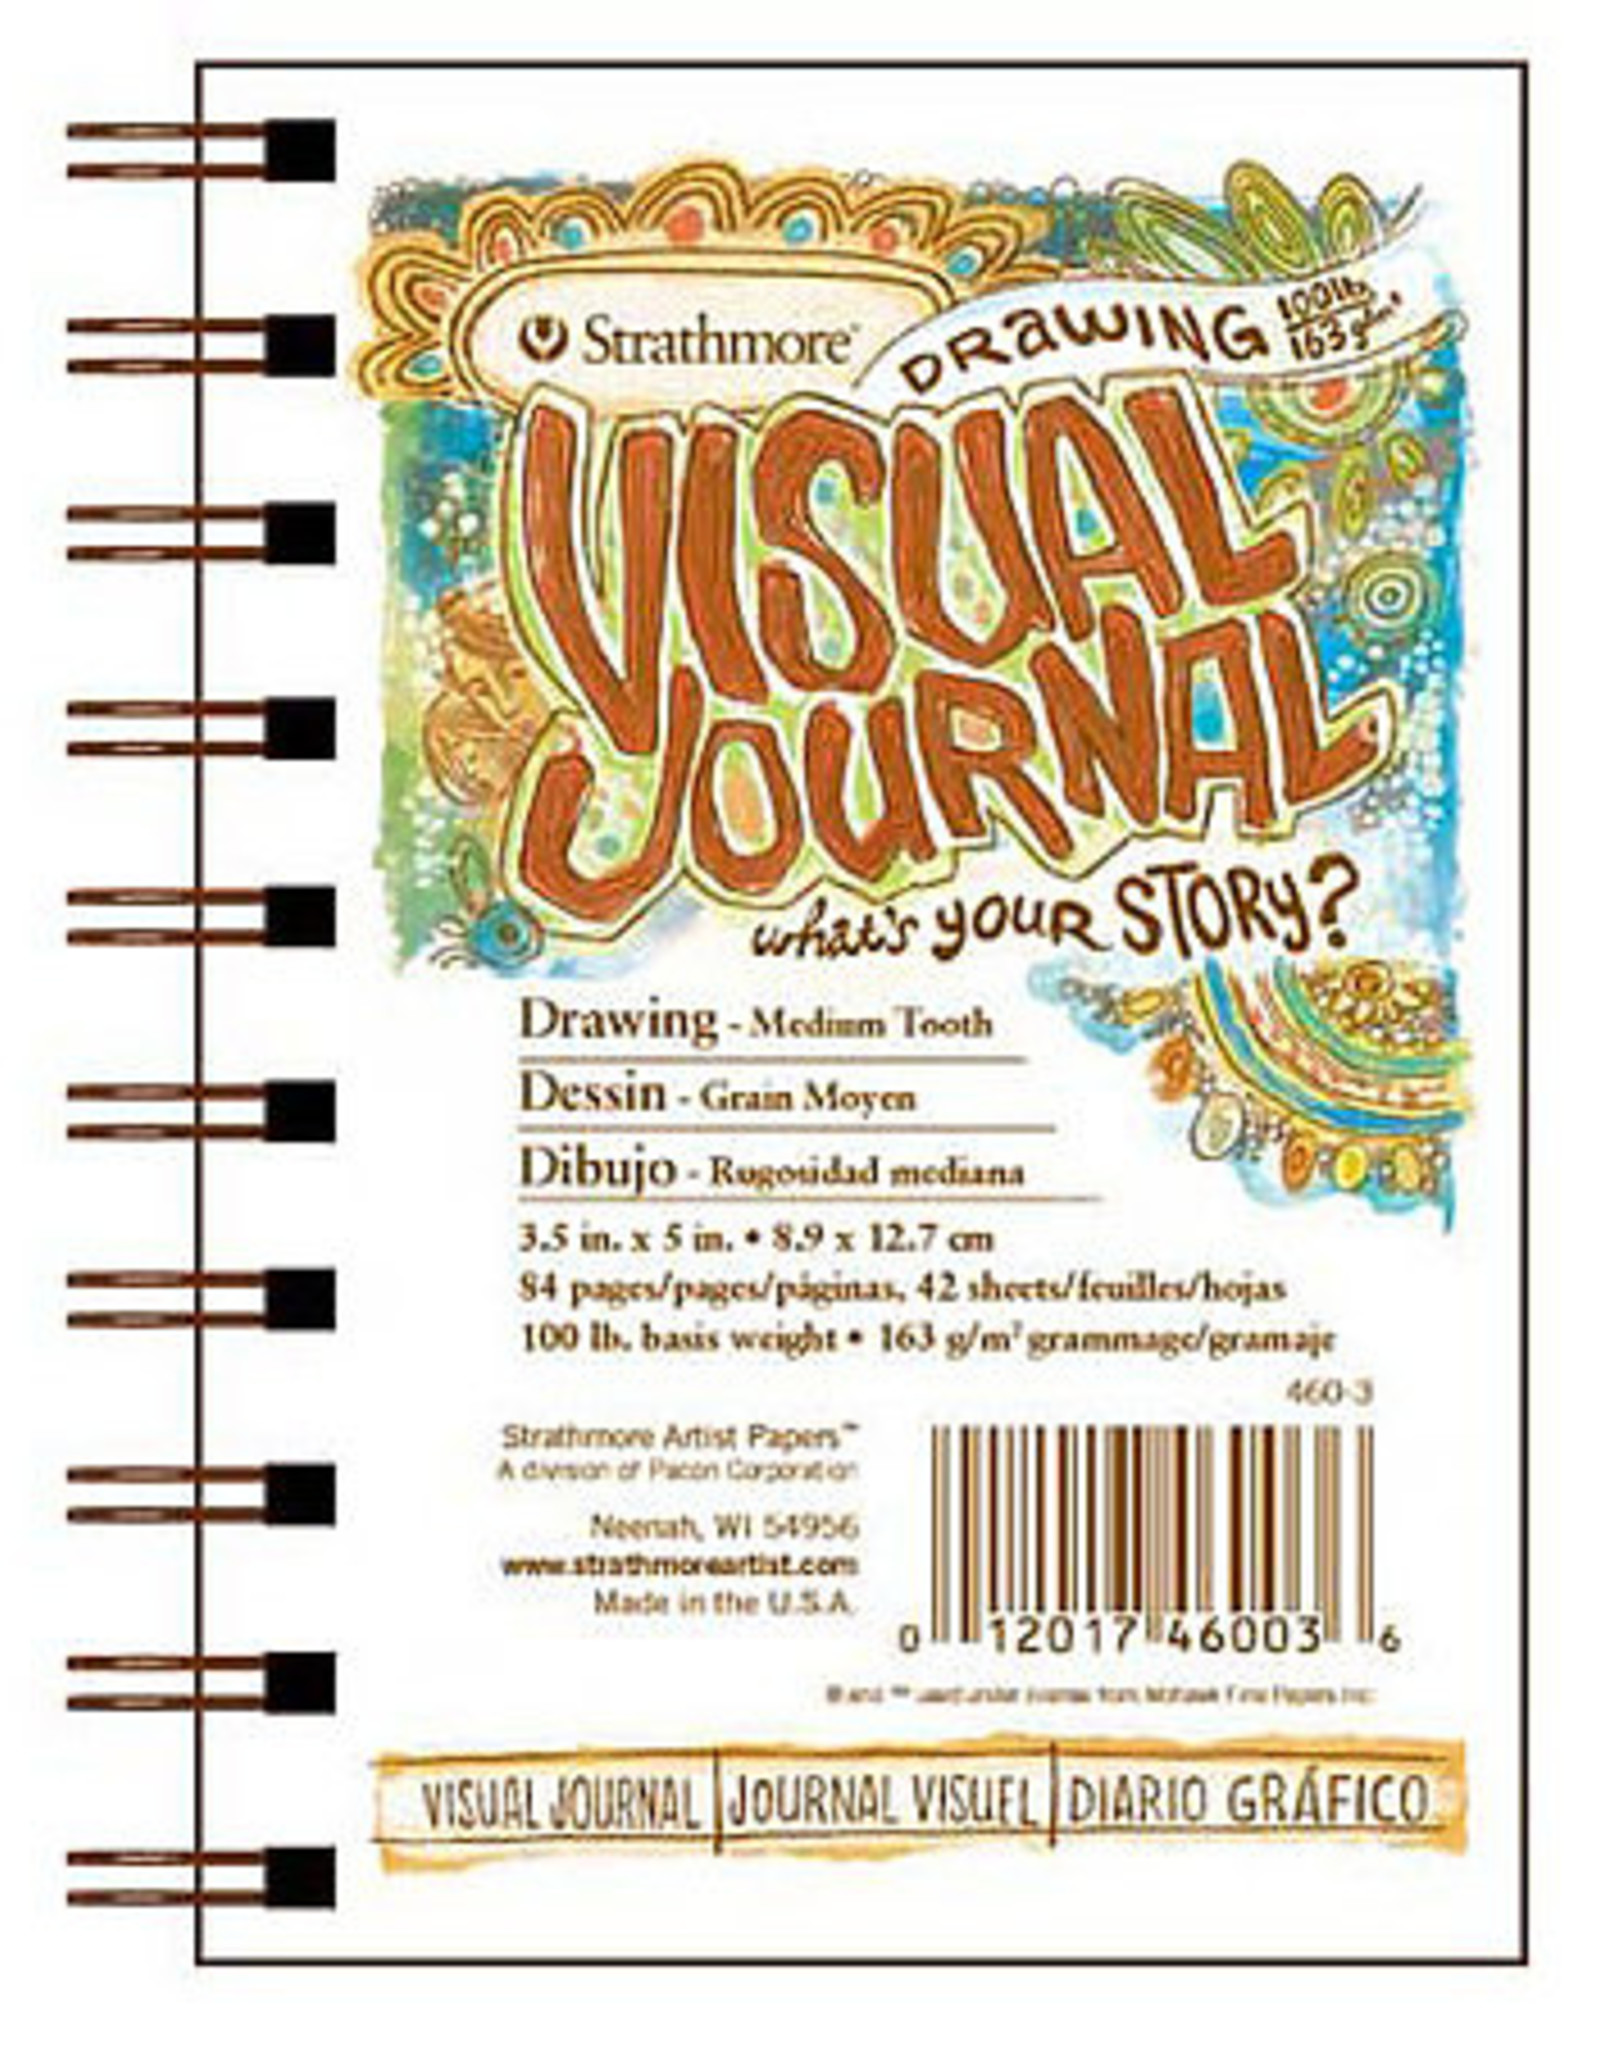 Strathmore Visual Journal Mixed Media 9x12 - Spectrum The RMCAD Store